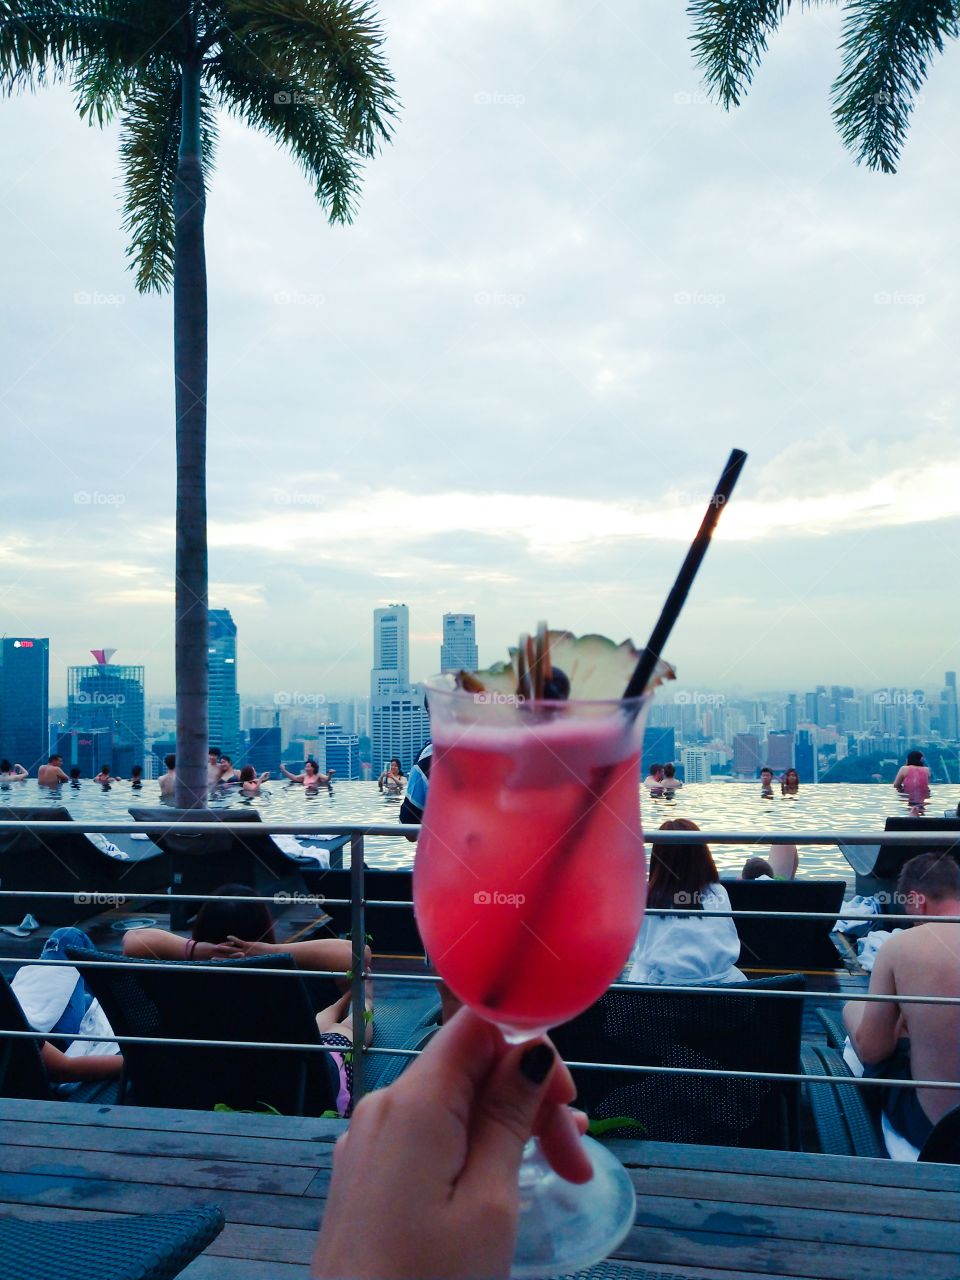 Enjoying a great Singapore Sling at the infinity pool in the Marina Bay Sands Hotel in Singapore. With tons of other people in the adult pool and a timid skyline o in the back.